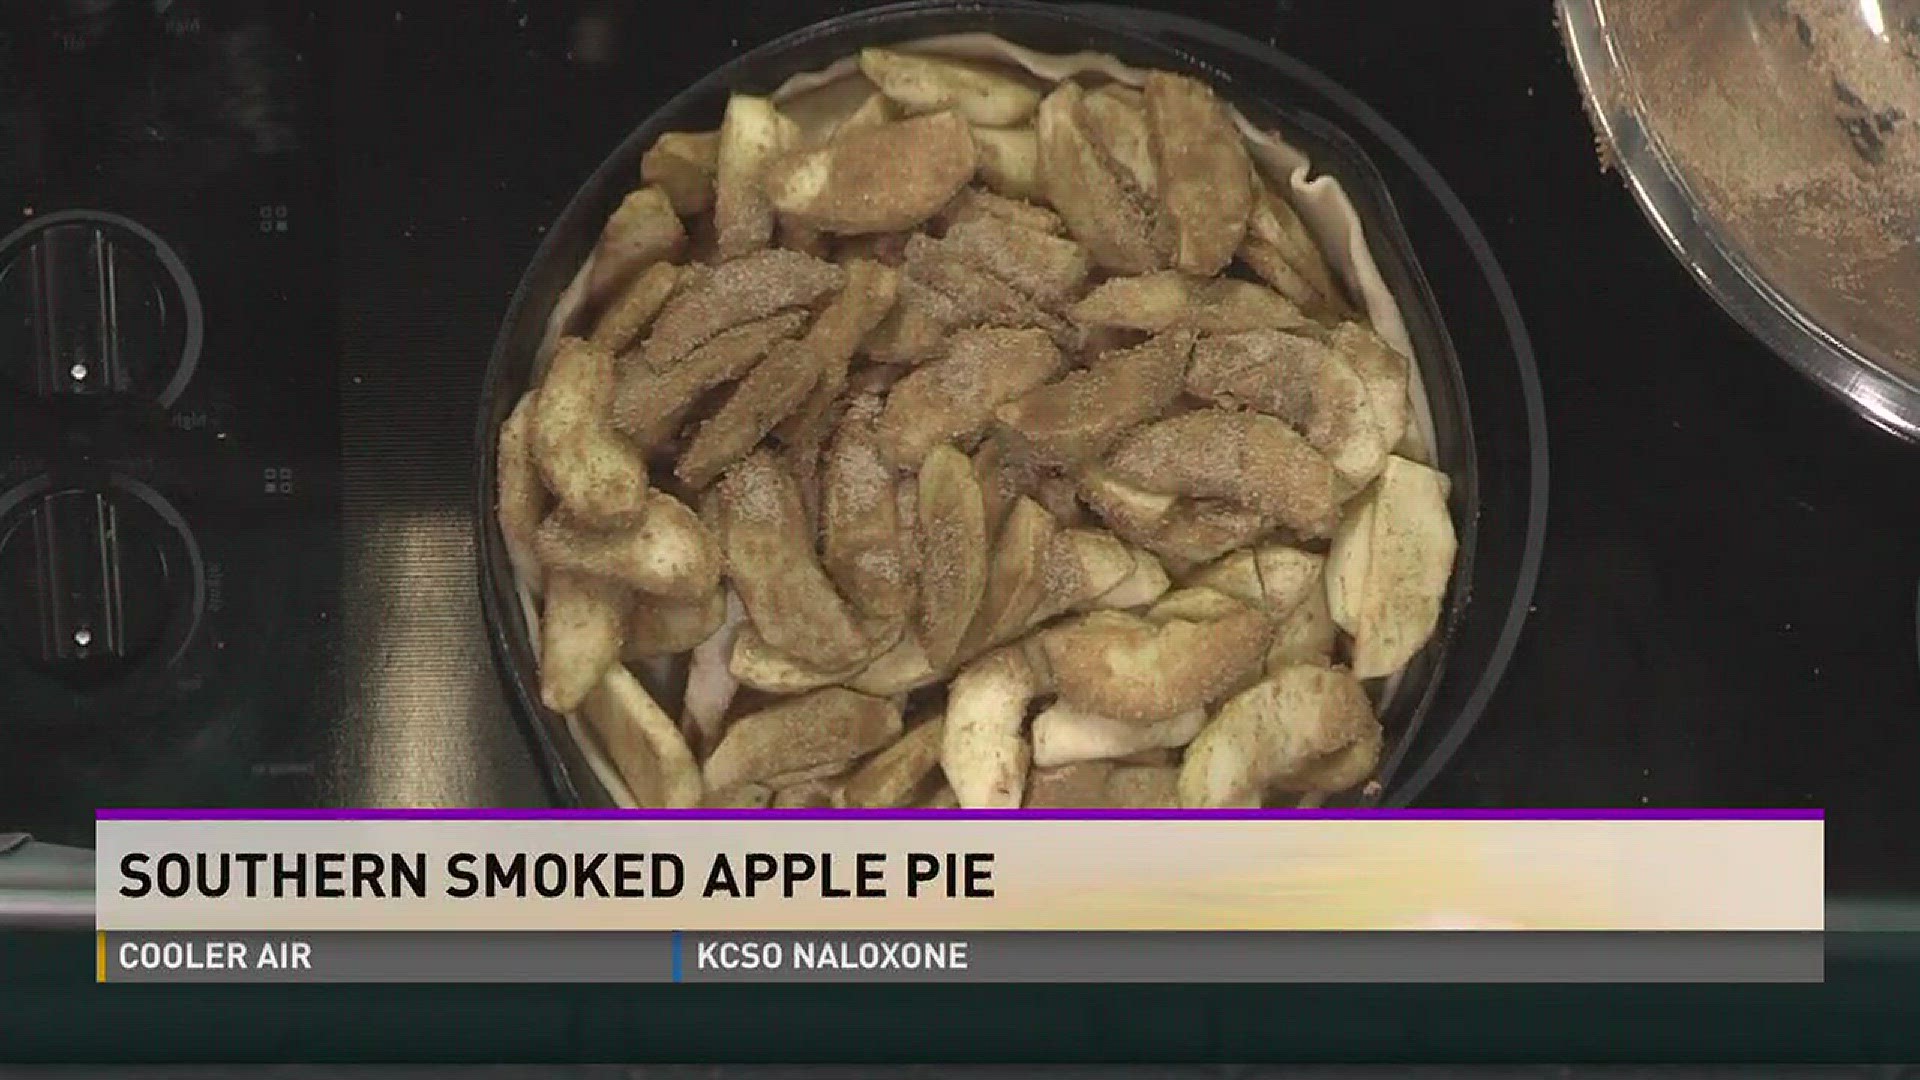 How To Make A Southern Smoked Apple Pie